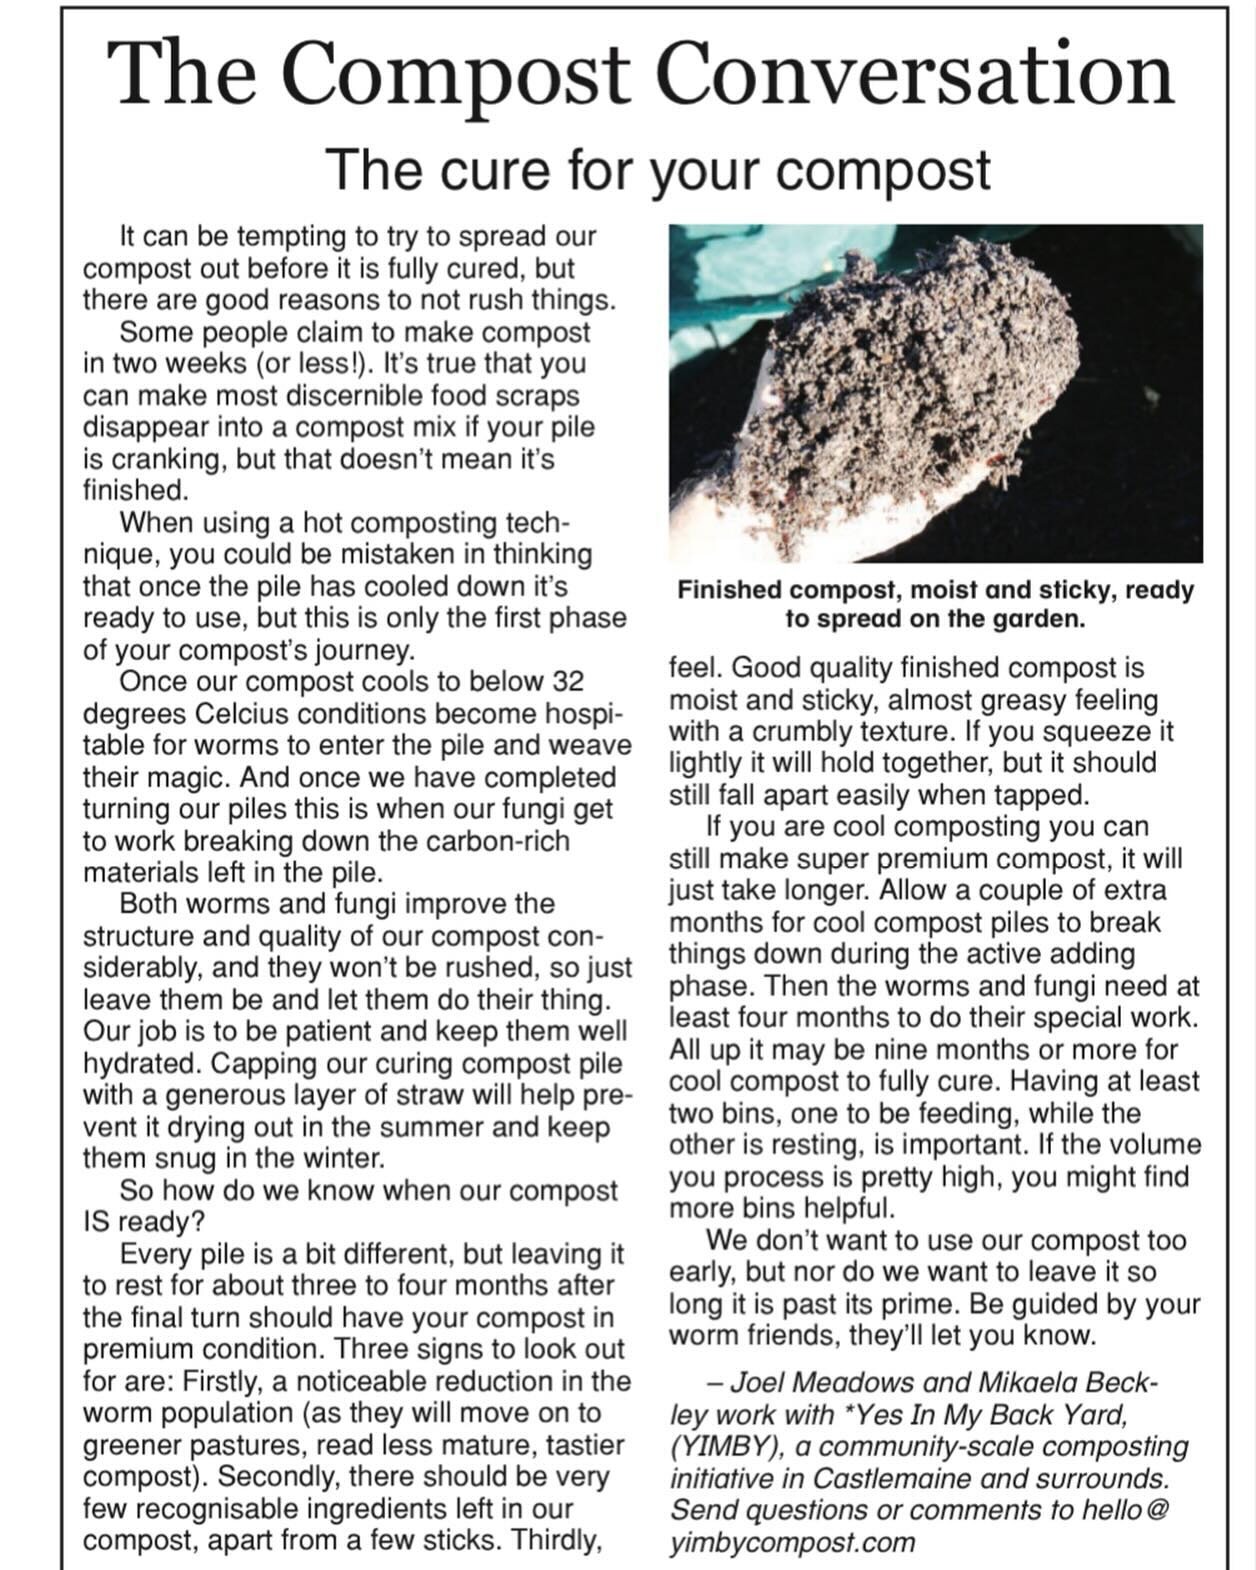 How do you know when your compost is ready? Check out this weeks Compost Conversation in the @midlandexpress where Joel &amp; @mikaelaraebeckley talk us through what we are looking for in a mature compost. 

#hotcompost #communitycompost #localsoluti